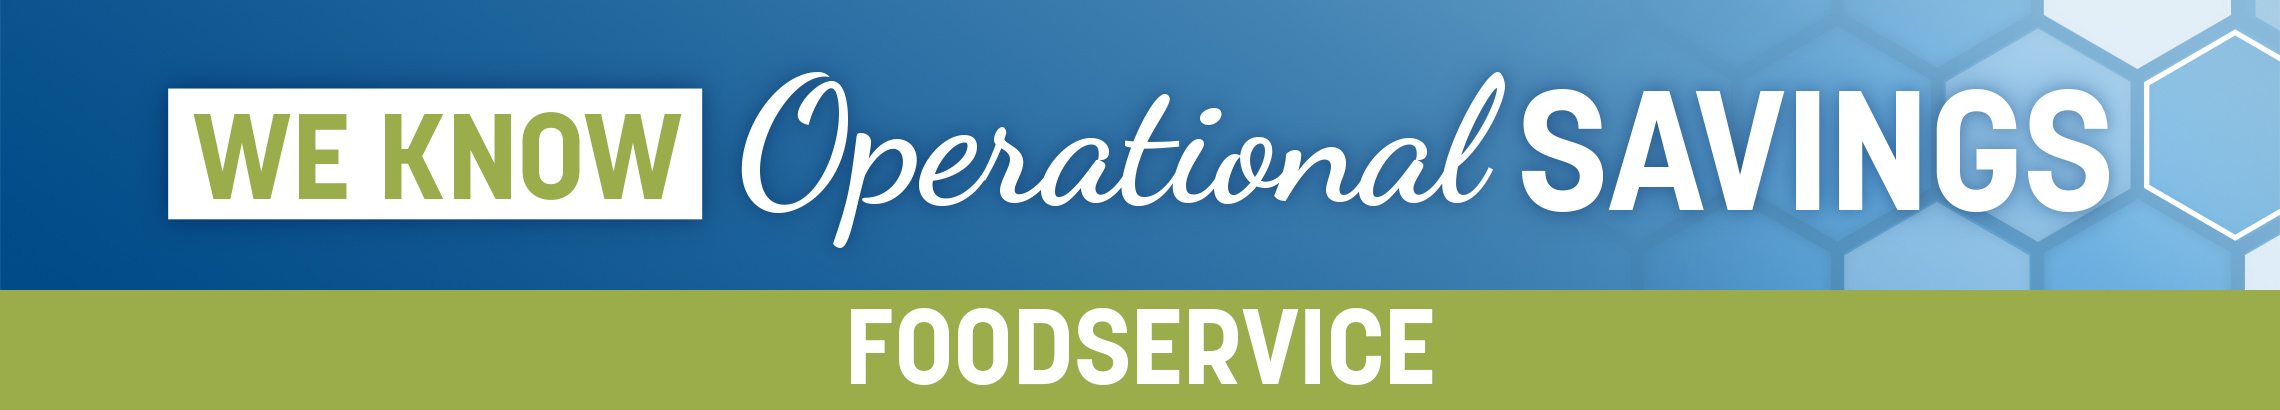 We Know Operational Savings: Foodservice